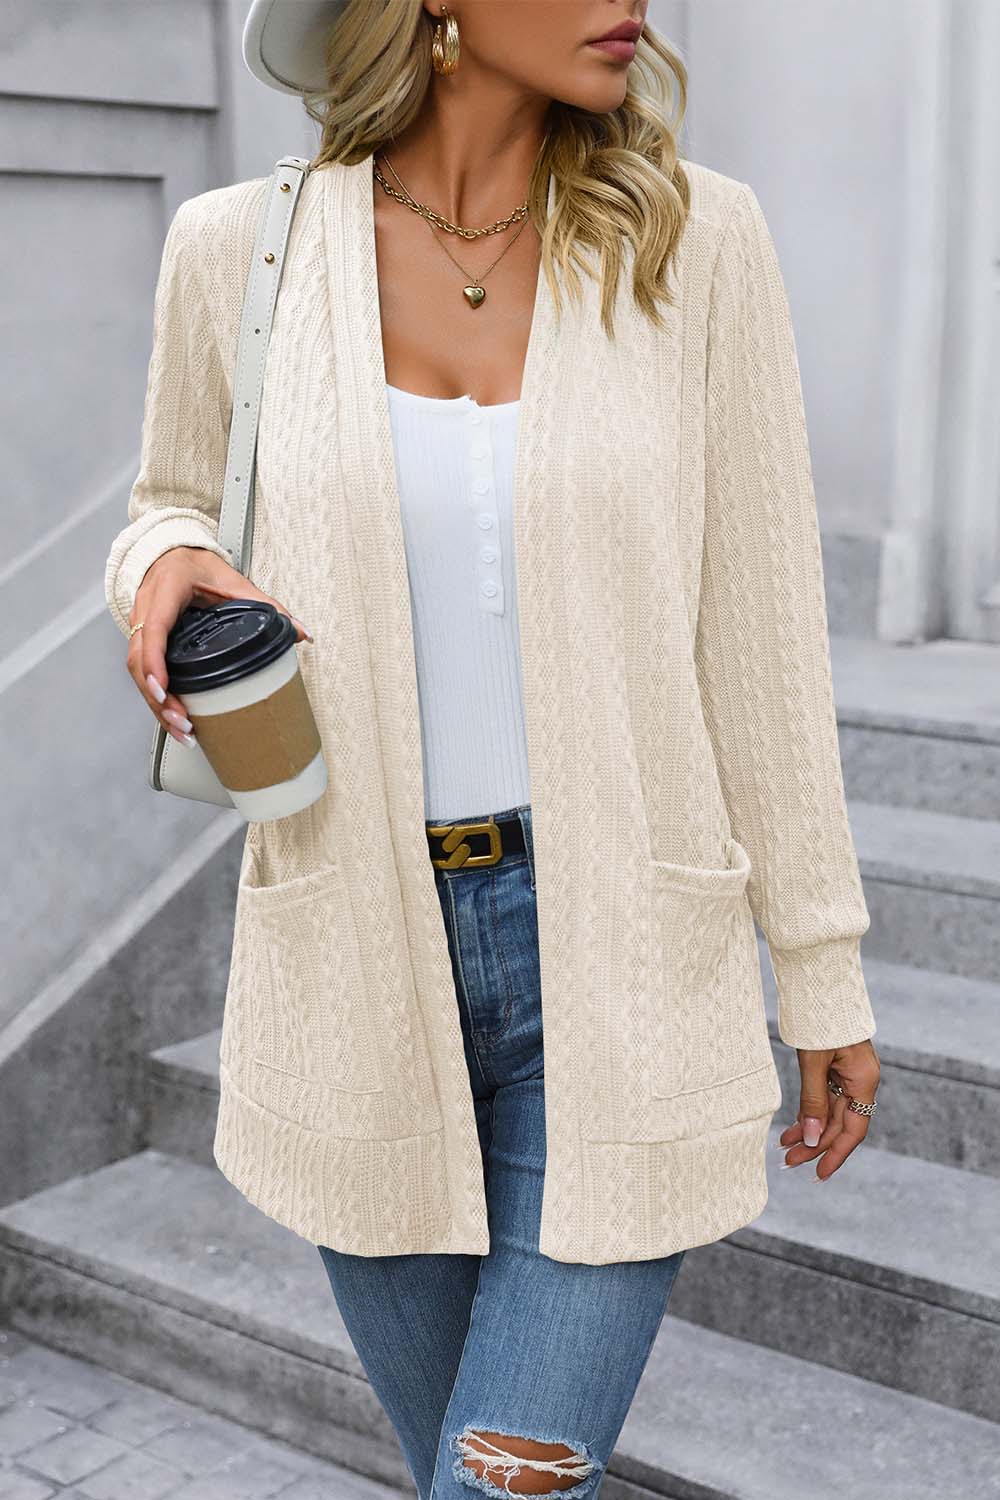 Cable-Knit Long Sleeve Cardigan with Pocket - Beige / S - Women’s Clothing & Accessories - Shirts & Tops - 4 - 2024